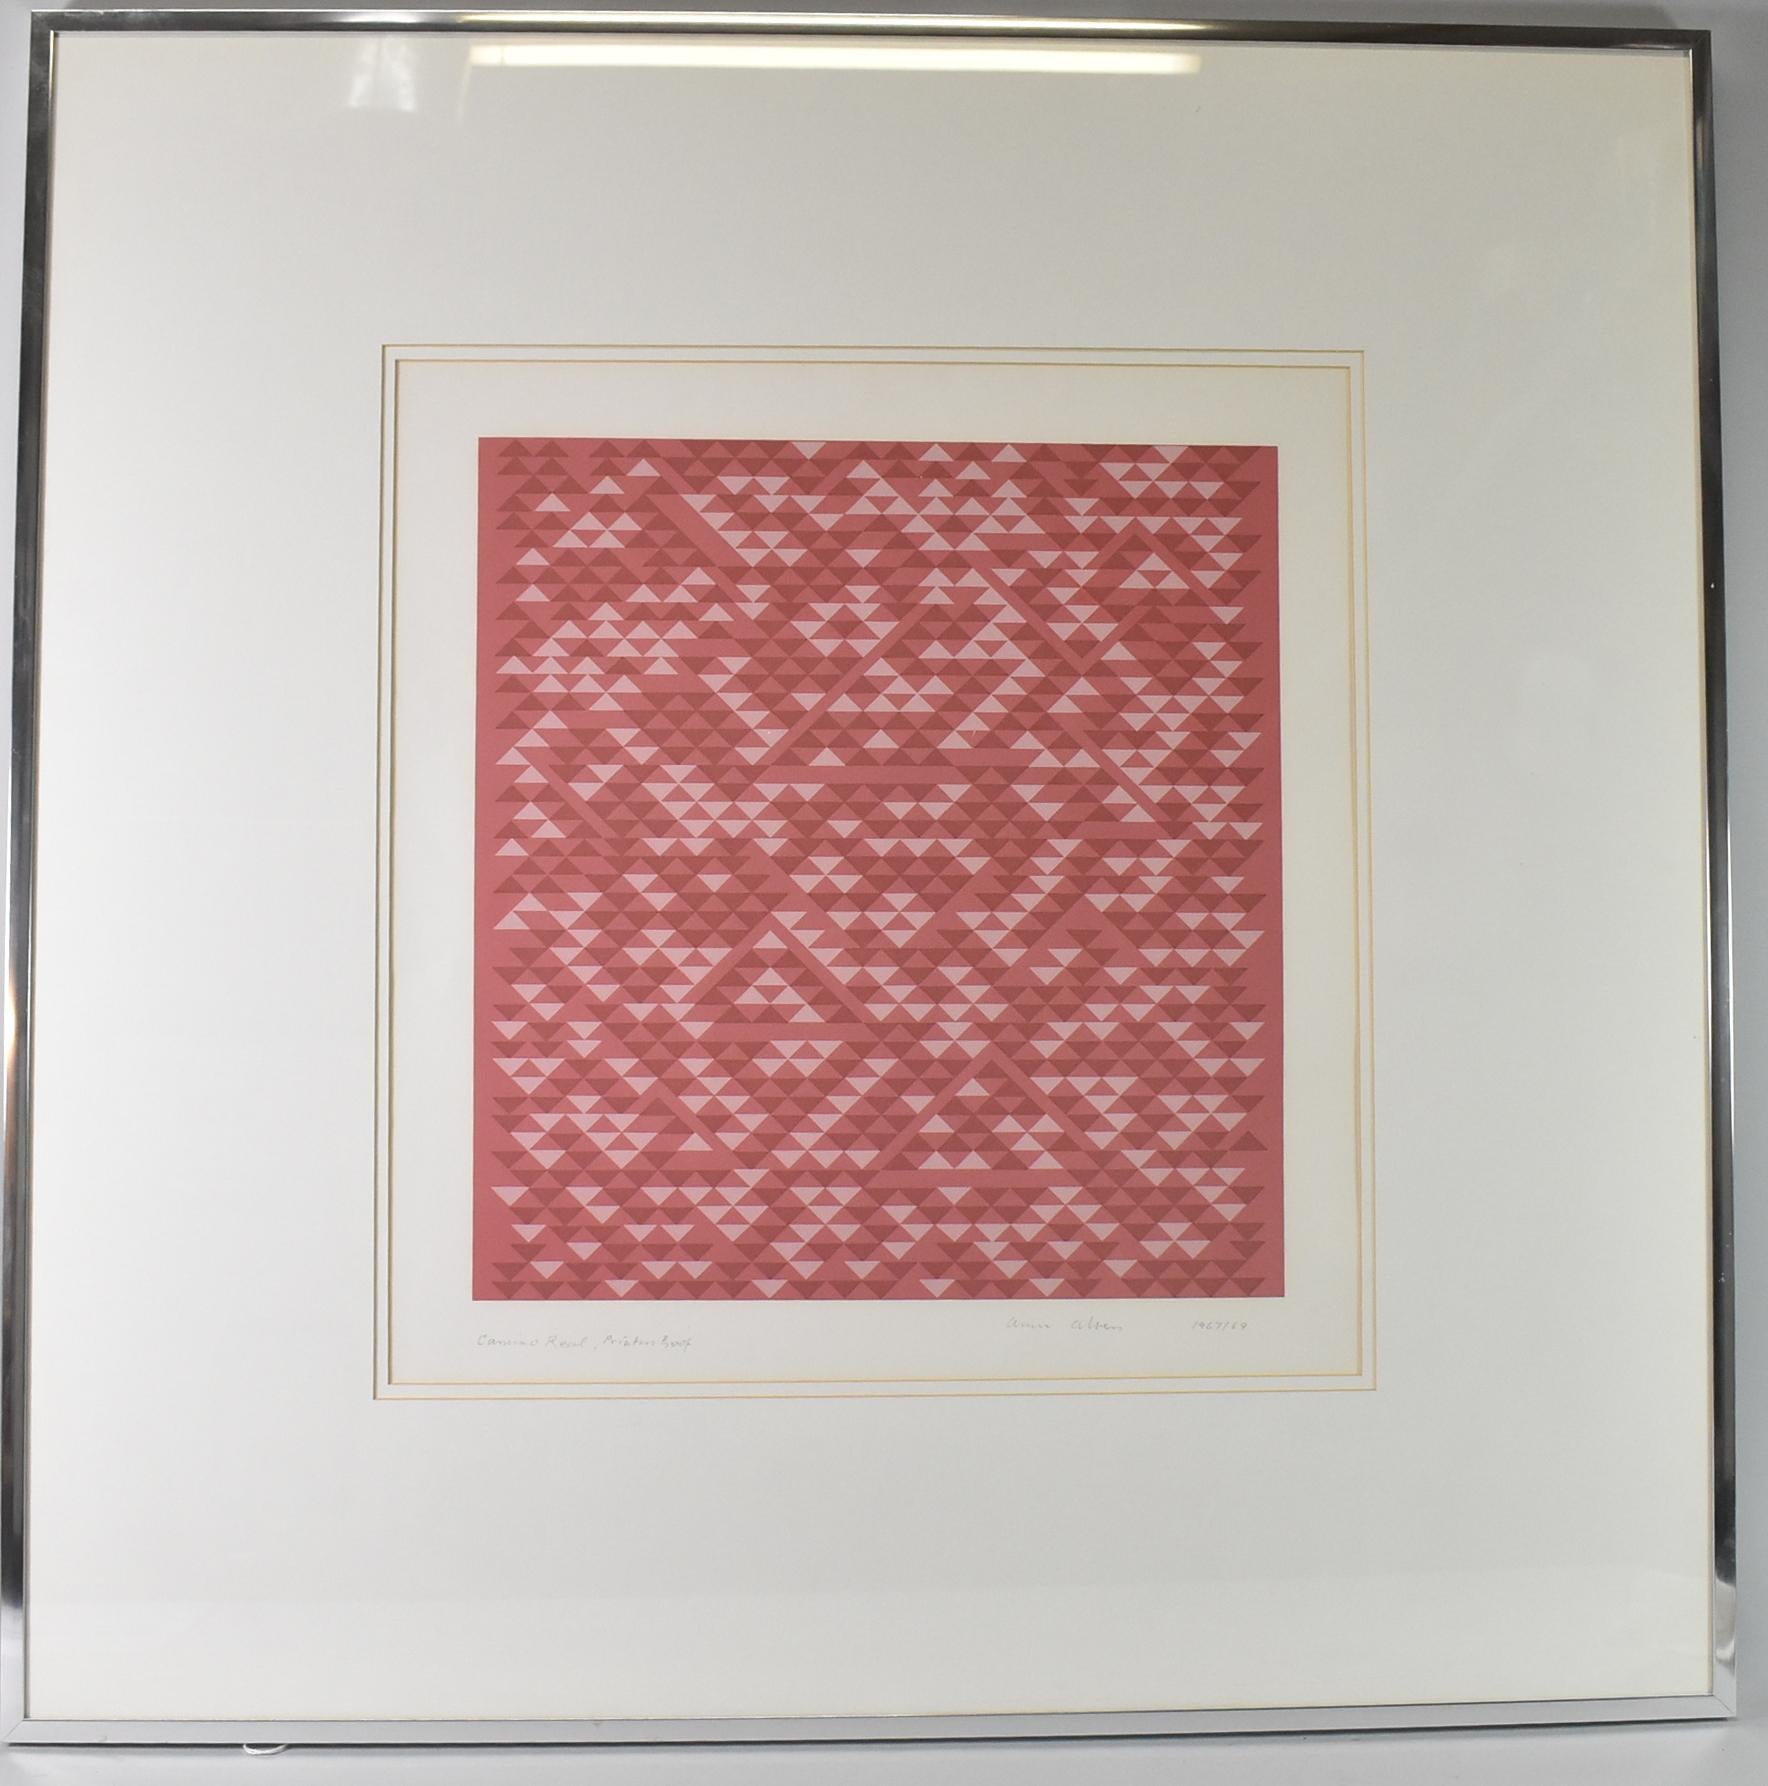 Anni Albers, Camino Real Screen-print Abstraction. Circa 1967-1969. Anni Albers (1899-1994), an artist who played an active part in 20th century modernism yet who has long been overshadowed by her husband, the painter and theoretician Josef Albers.